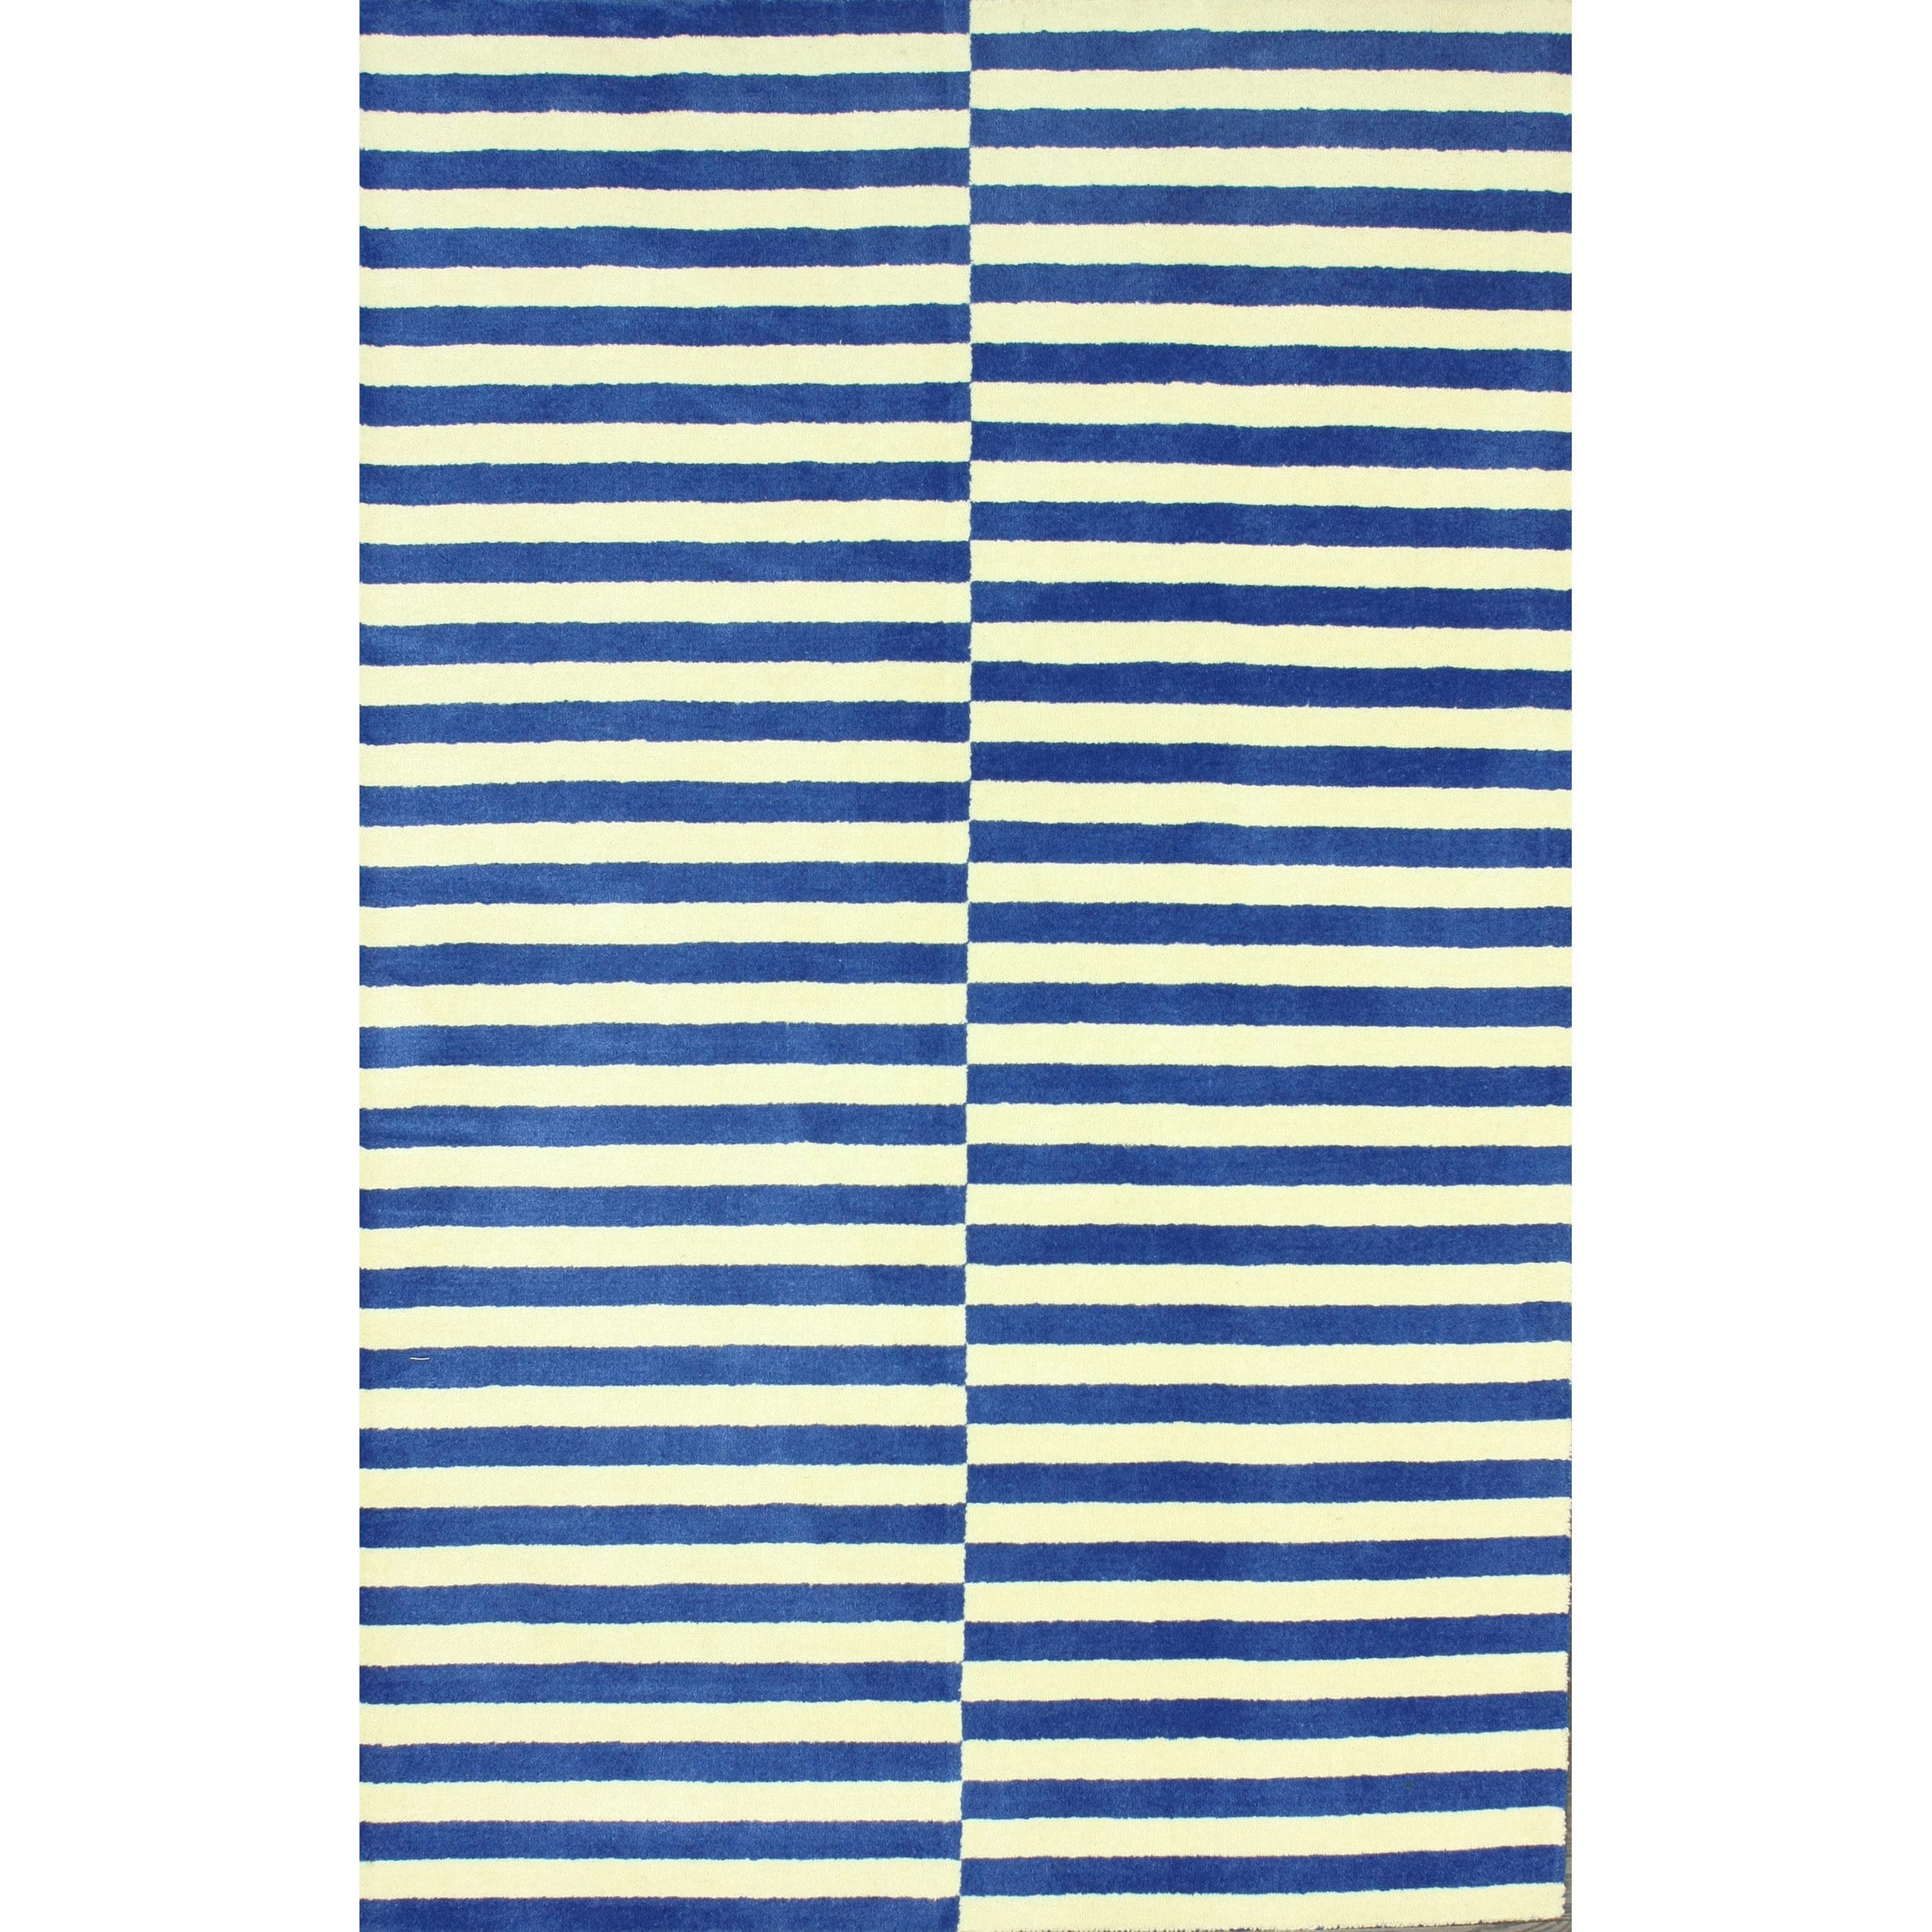 Nuloom Hand tufted Modern Stripes Blue New Zealand Wool 0.5 inch pile Rug (76 X 96)